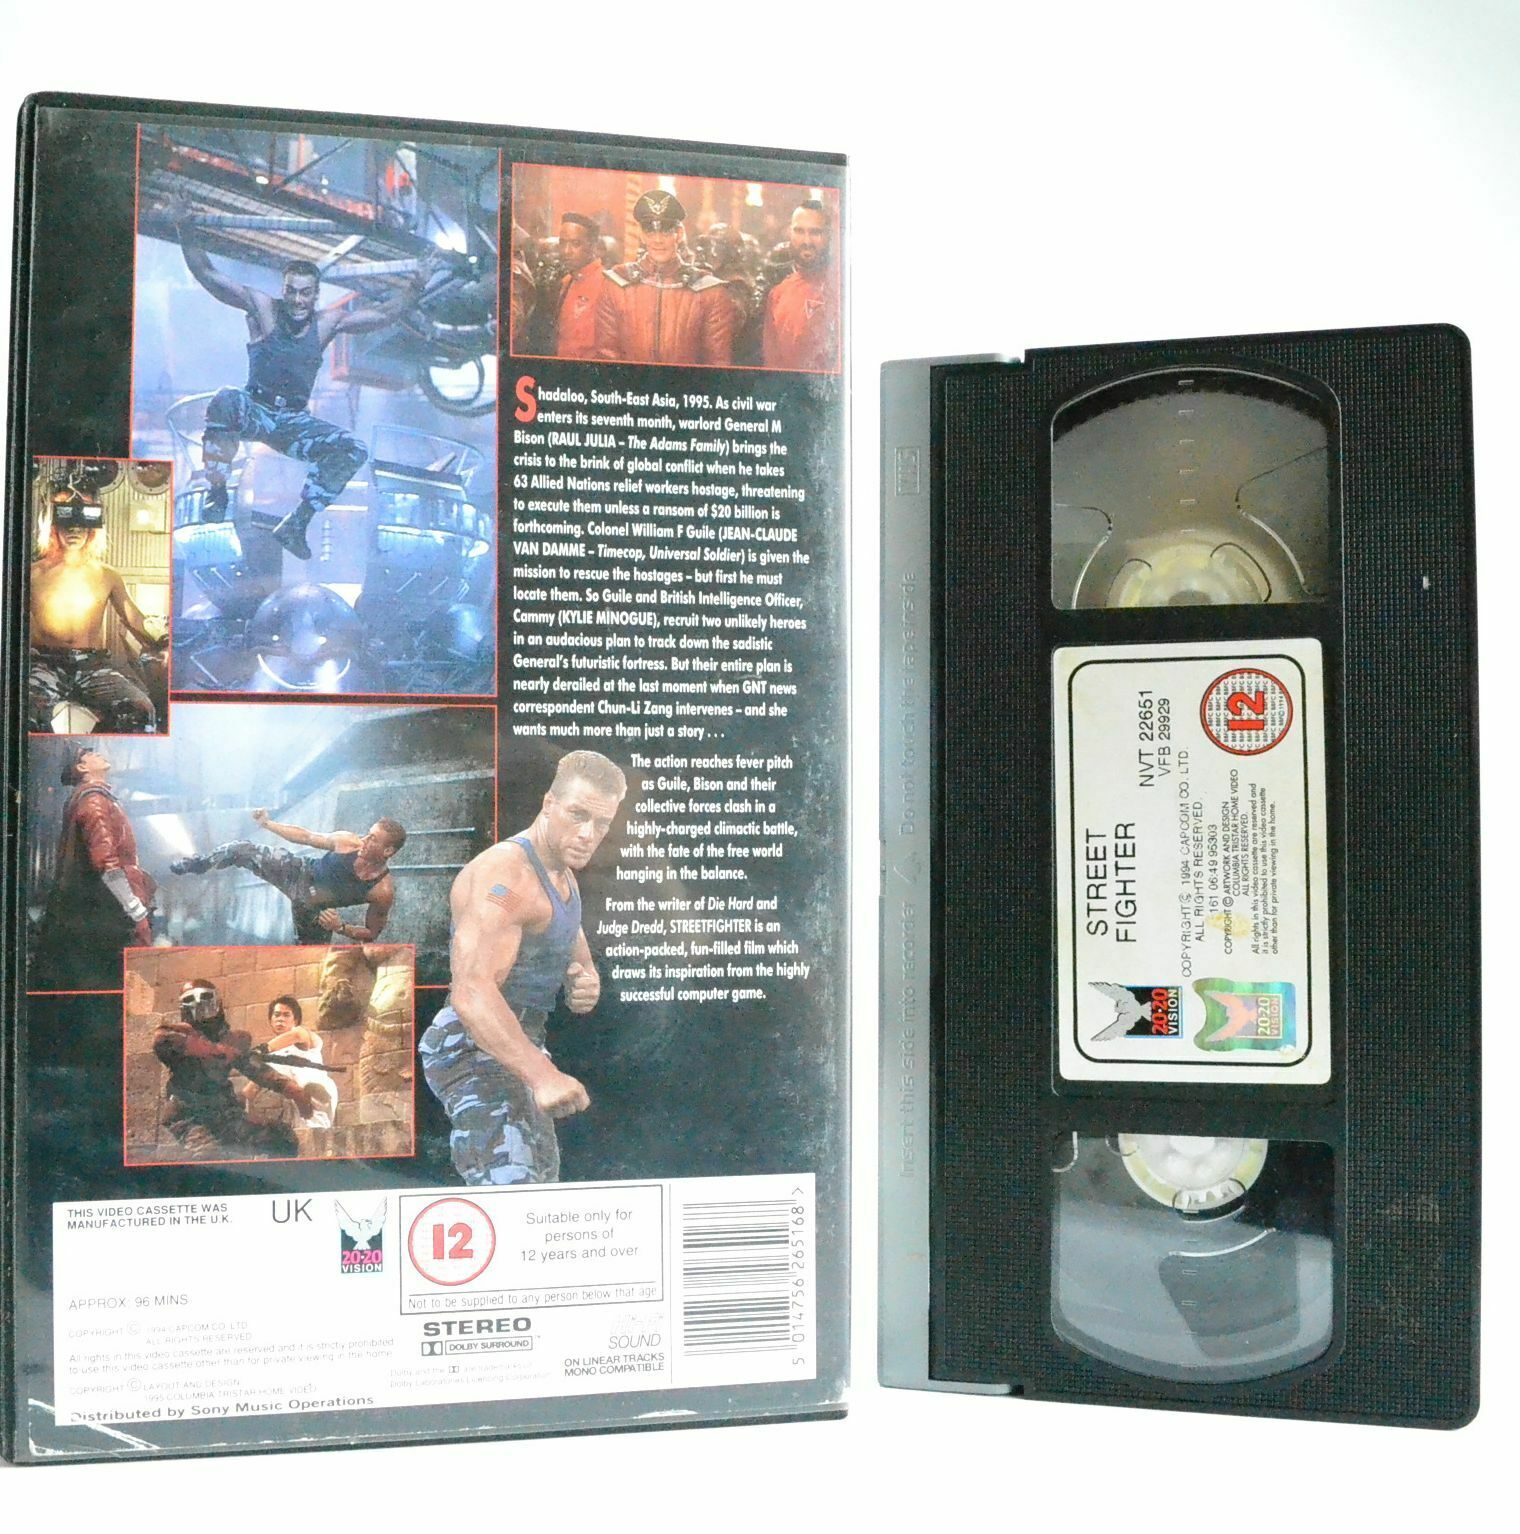 Street Fighter: The Ultimate Battle - Action (1994) - Large Box - R.Julia - VHS-